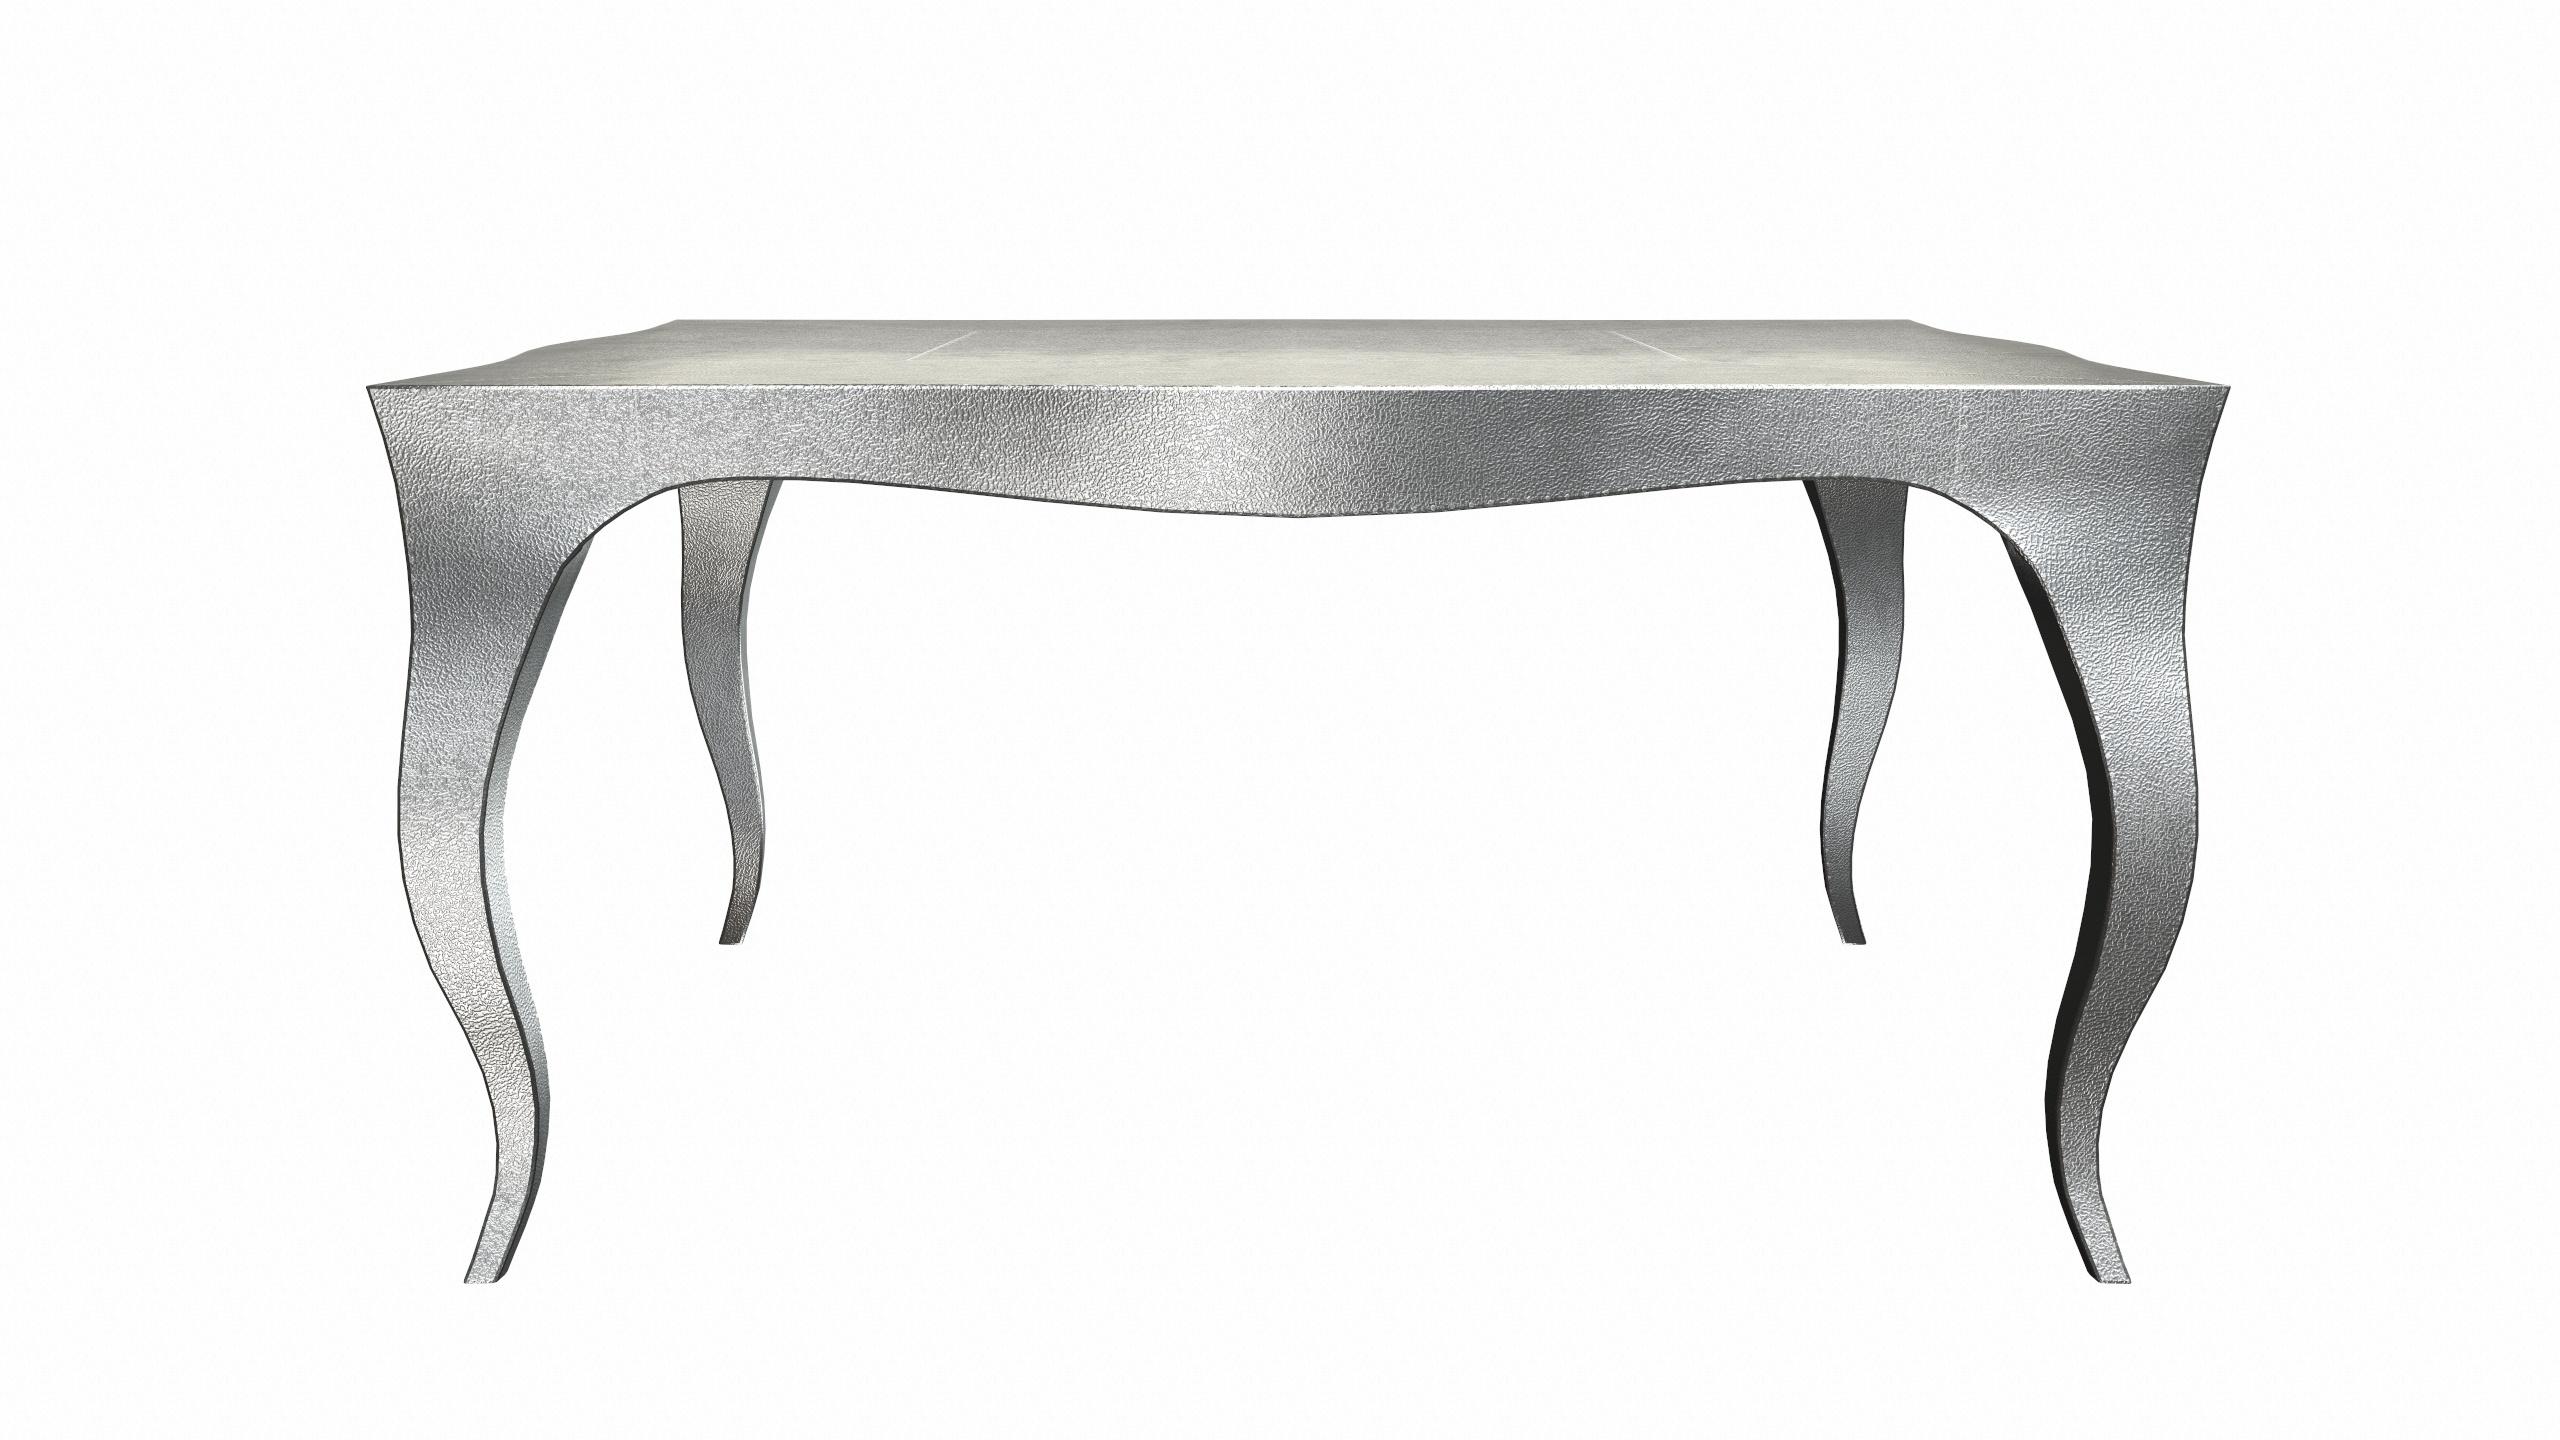 American Louise Art Deco Card Tables and Tea Tables Fine Hammered White Bronze by Paul M. For Sale